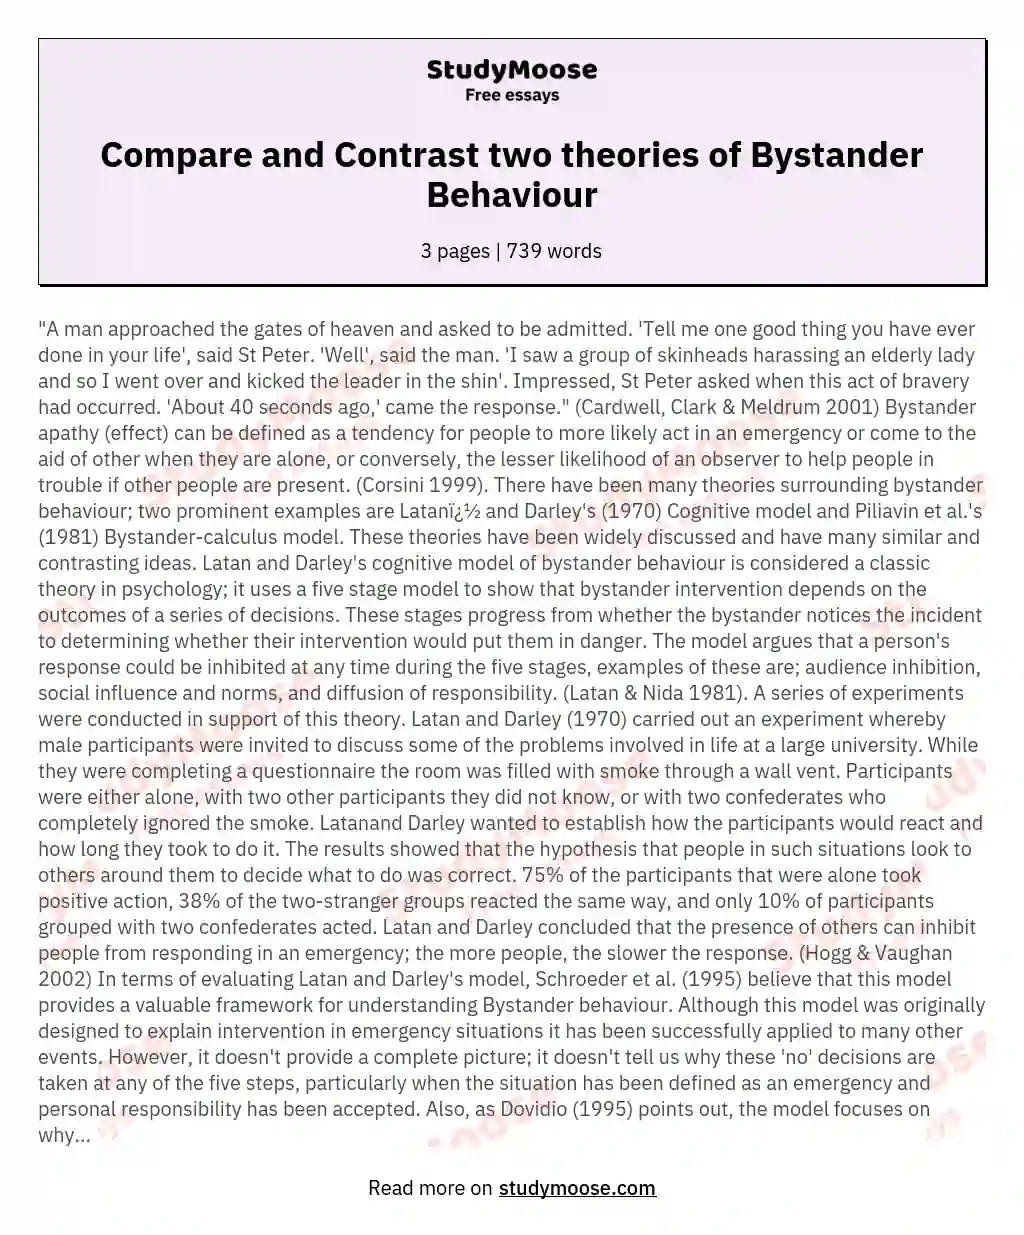 Compare and Contrast two theories of Bystander Behaviour